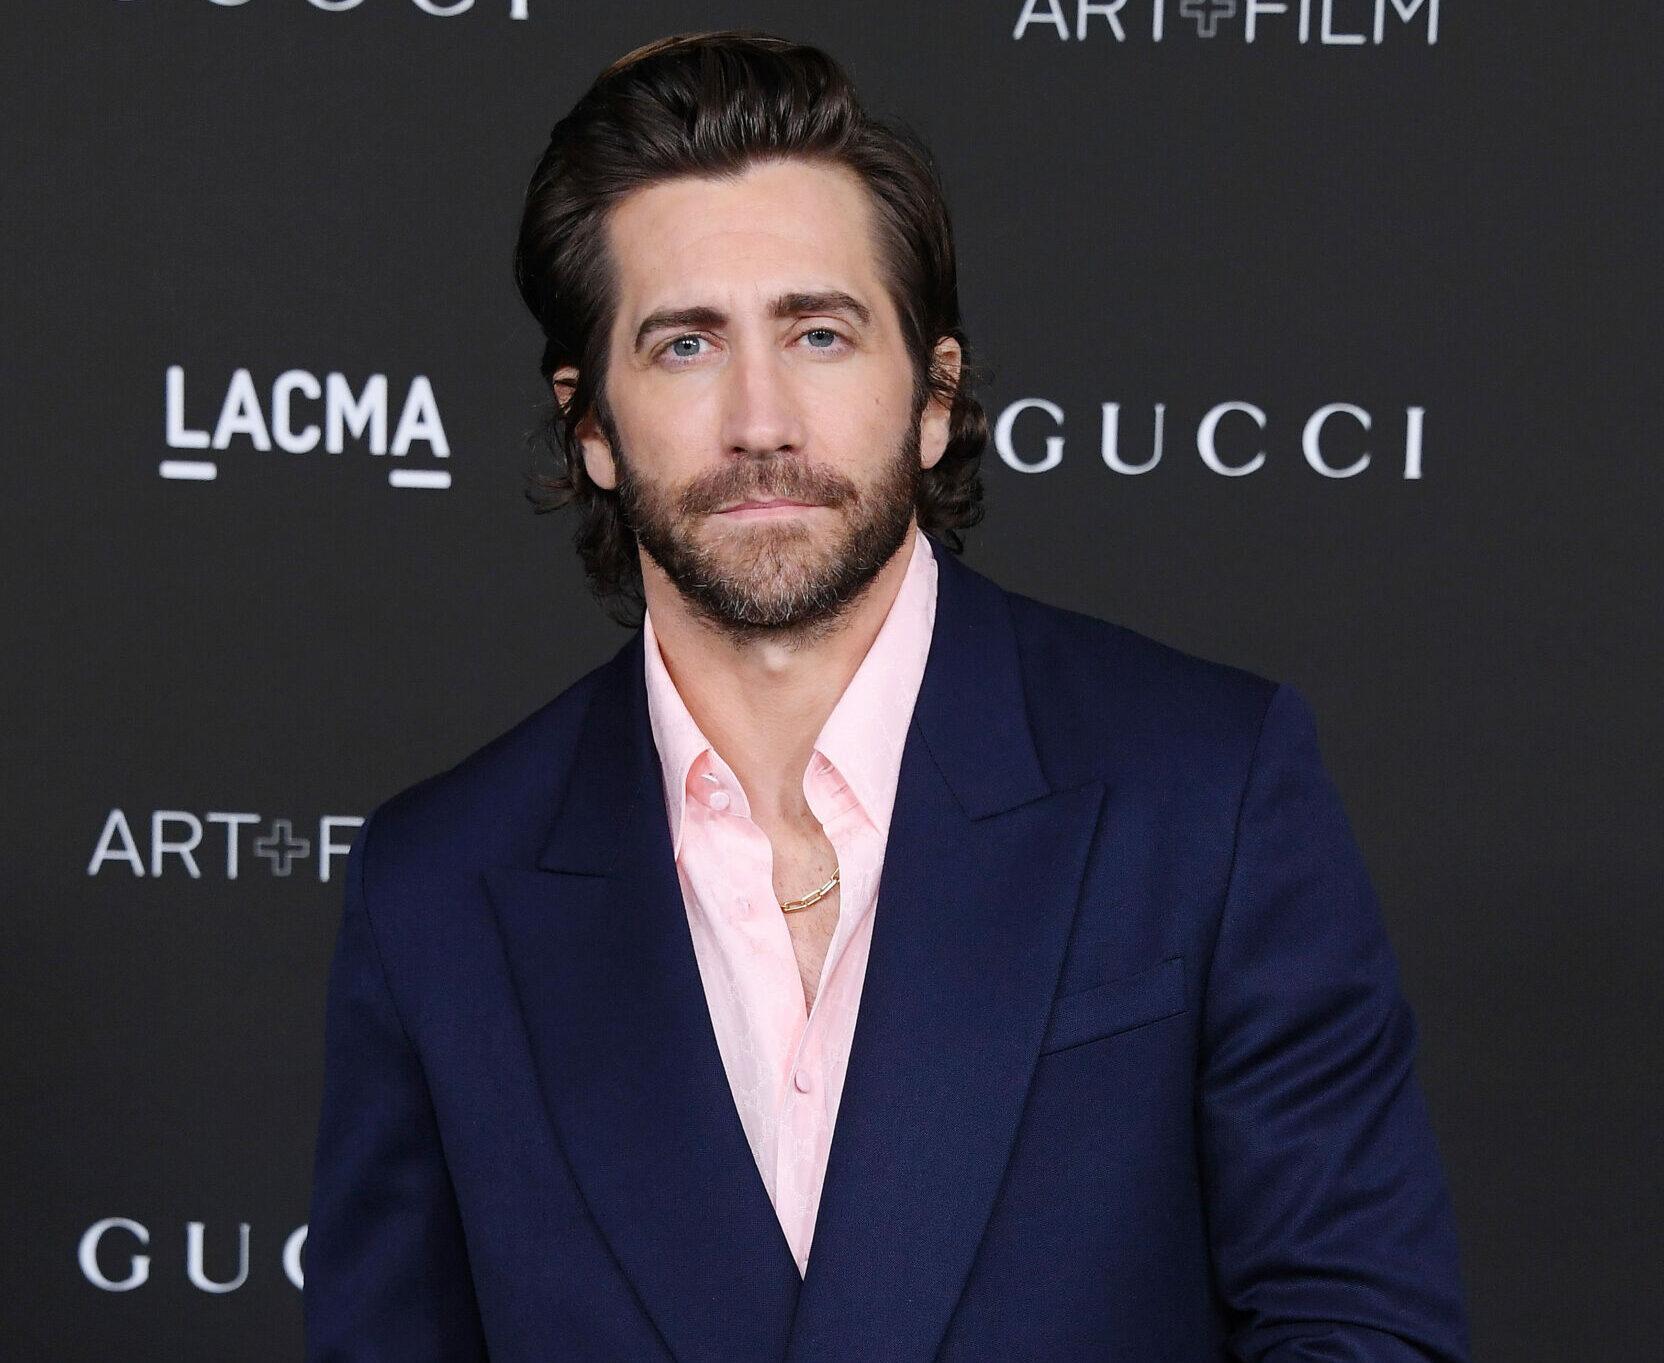 Jake Gyllenhaal at 10th Annual LACMA ART FILM GALA Presented By Gucci